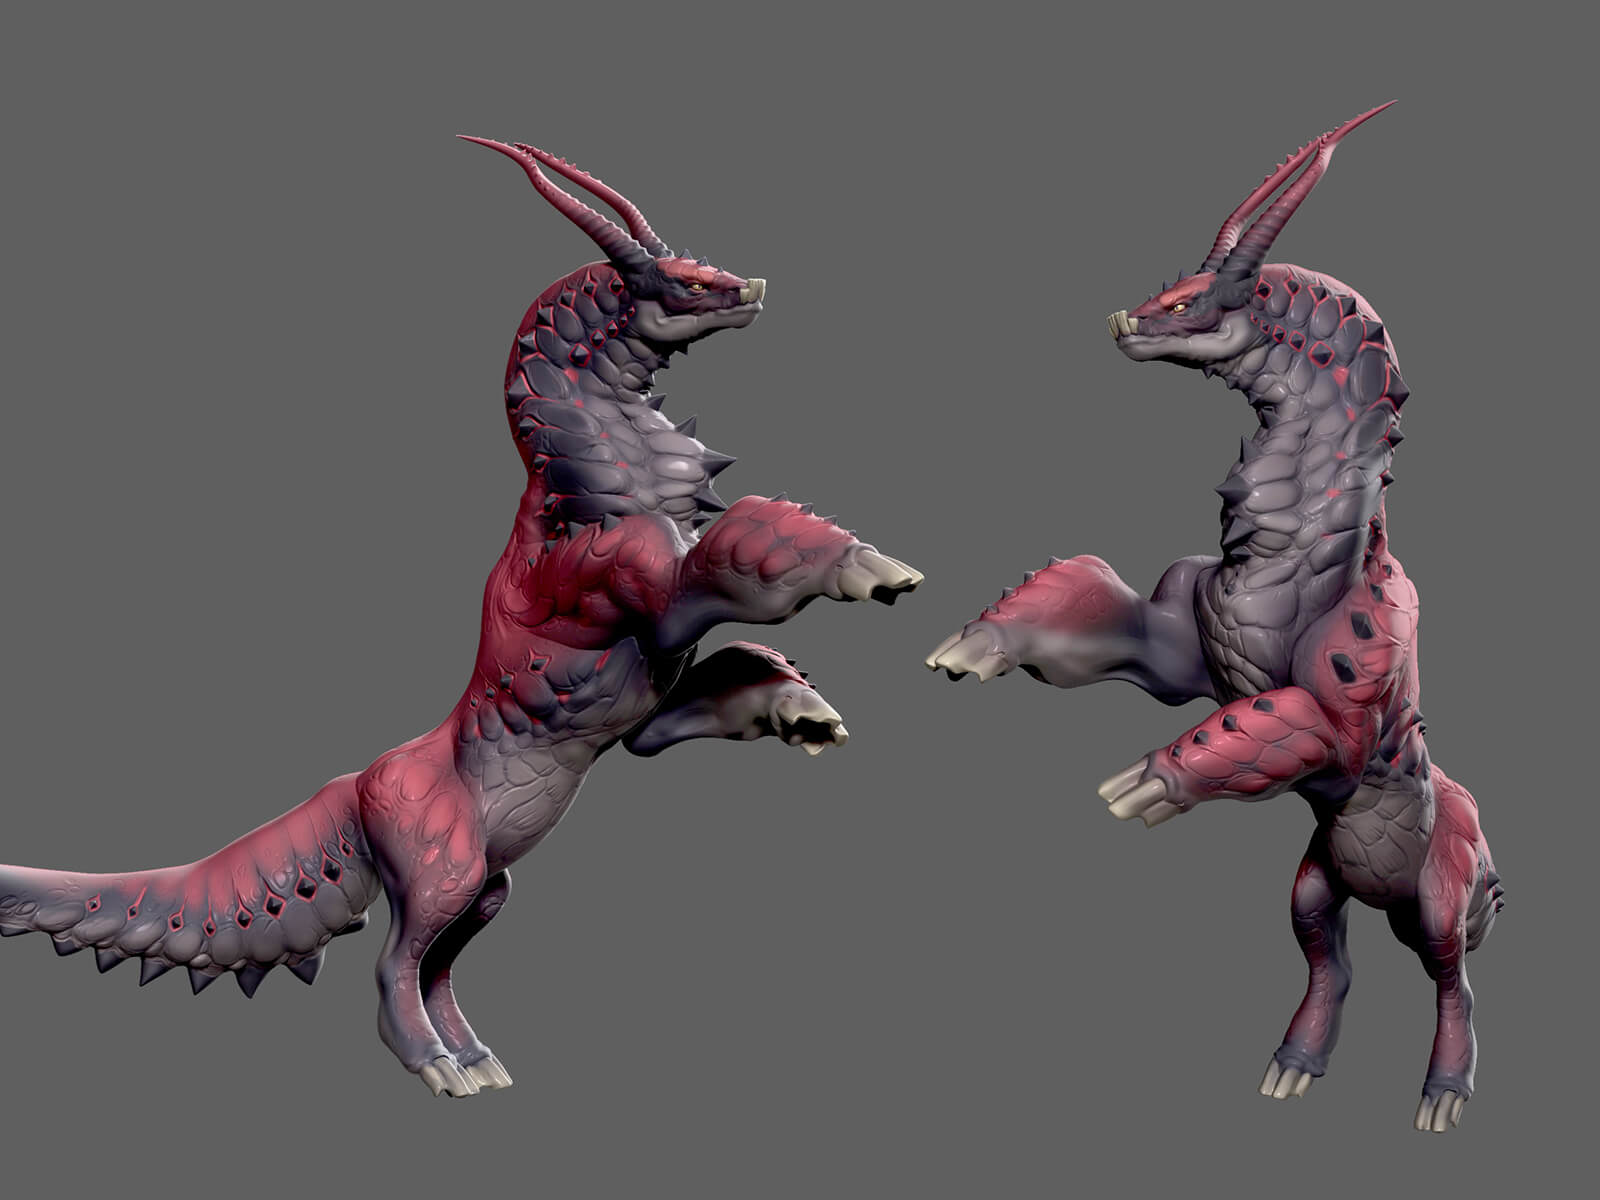 Two angles of a dragon-like creature standing on its hind legs